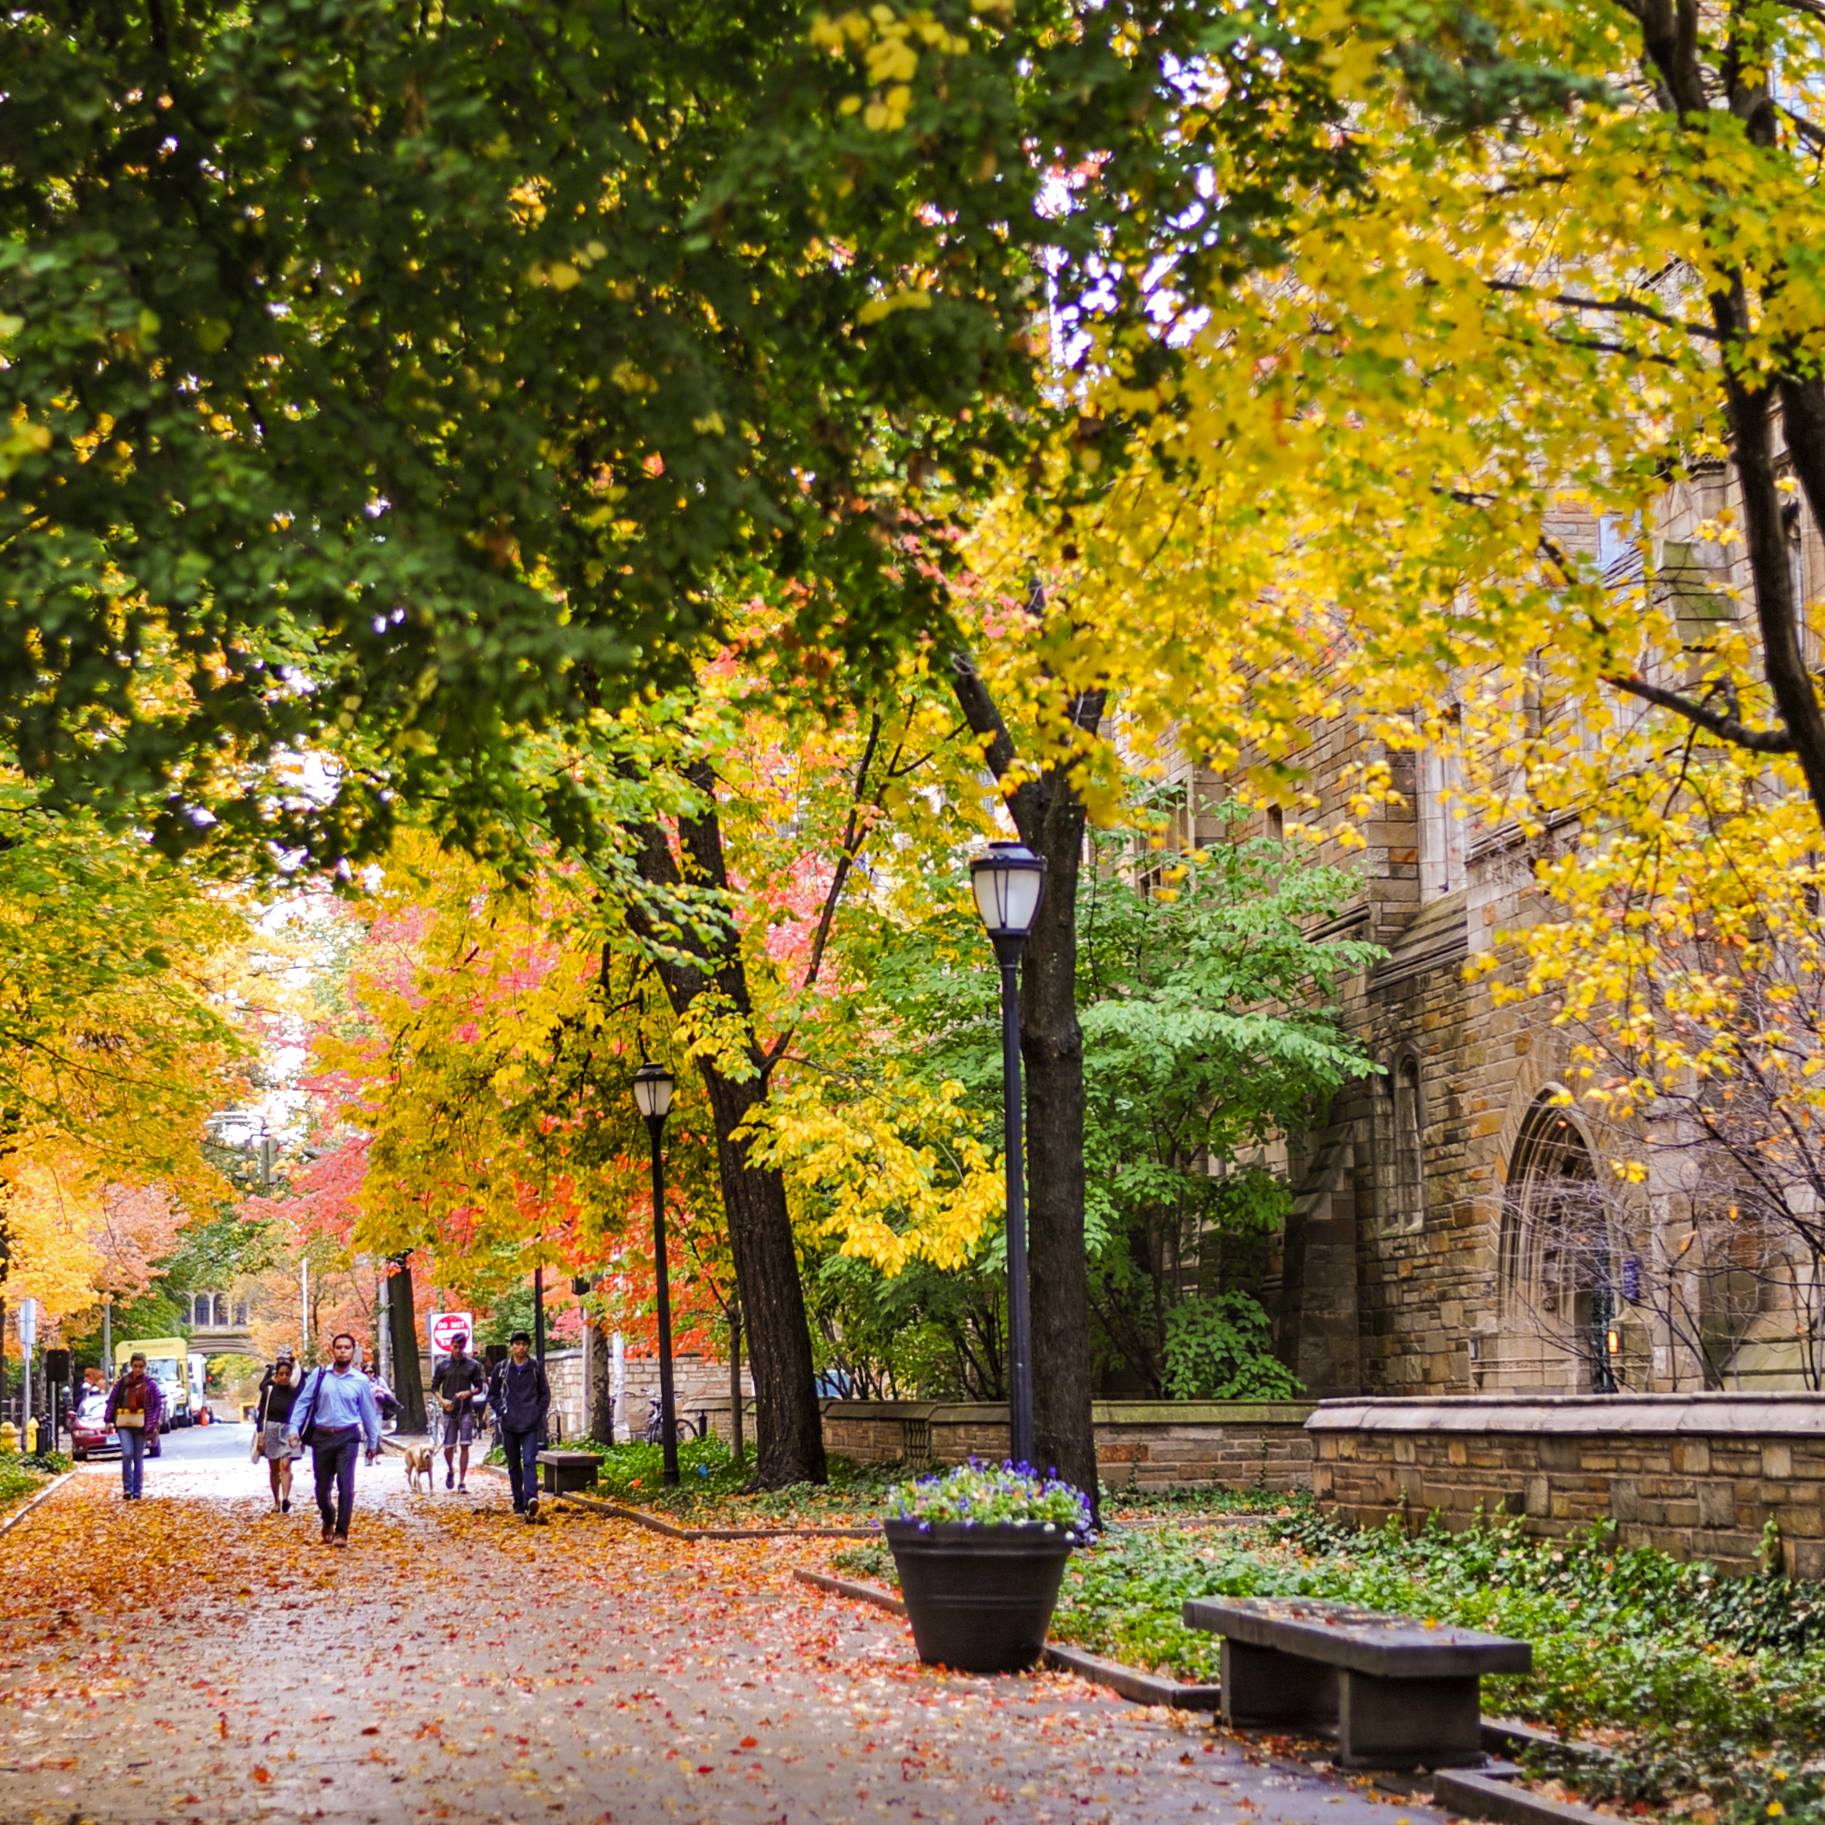 A Guide to the Best Hotels and Restaurants near Yale University